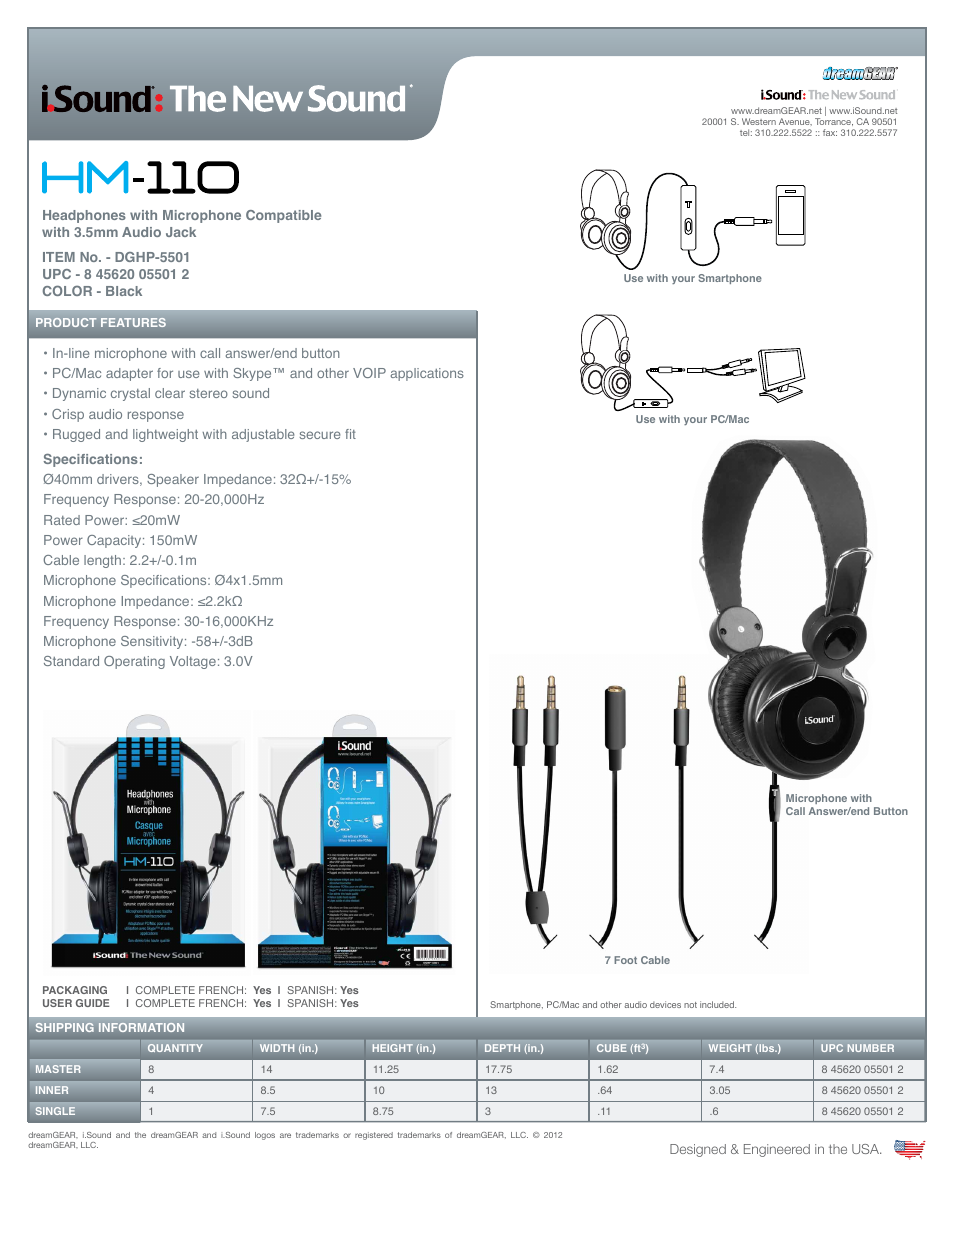 HM-110 Headphones with Microphone - Sell Sheet